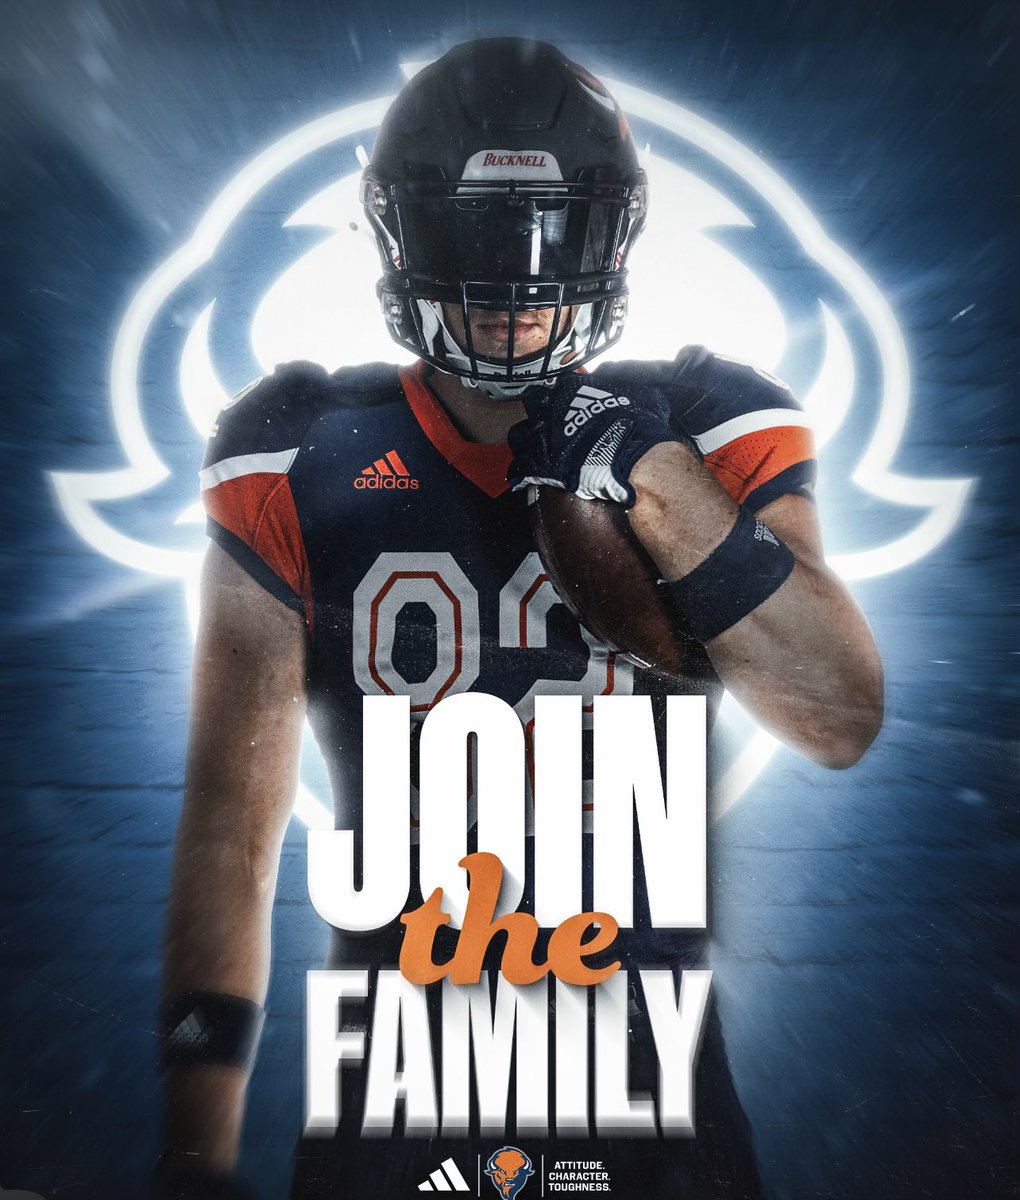 After an amazing conversation with @CoachCole94 I am extremely blessed to receive a D1 offer from bucknell!! @Bucknell_FB @Coach_Bowers @InfoForge @VaPrepsRivals @TheCoachDavis_ @c4_training @Athletes540 @Spotlight39_Pod @WillVapreps #ACT #RunToWin